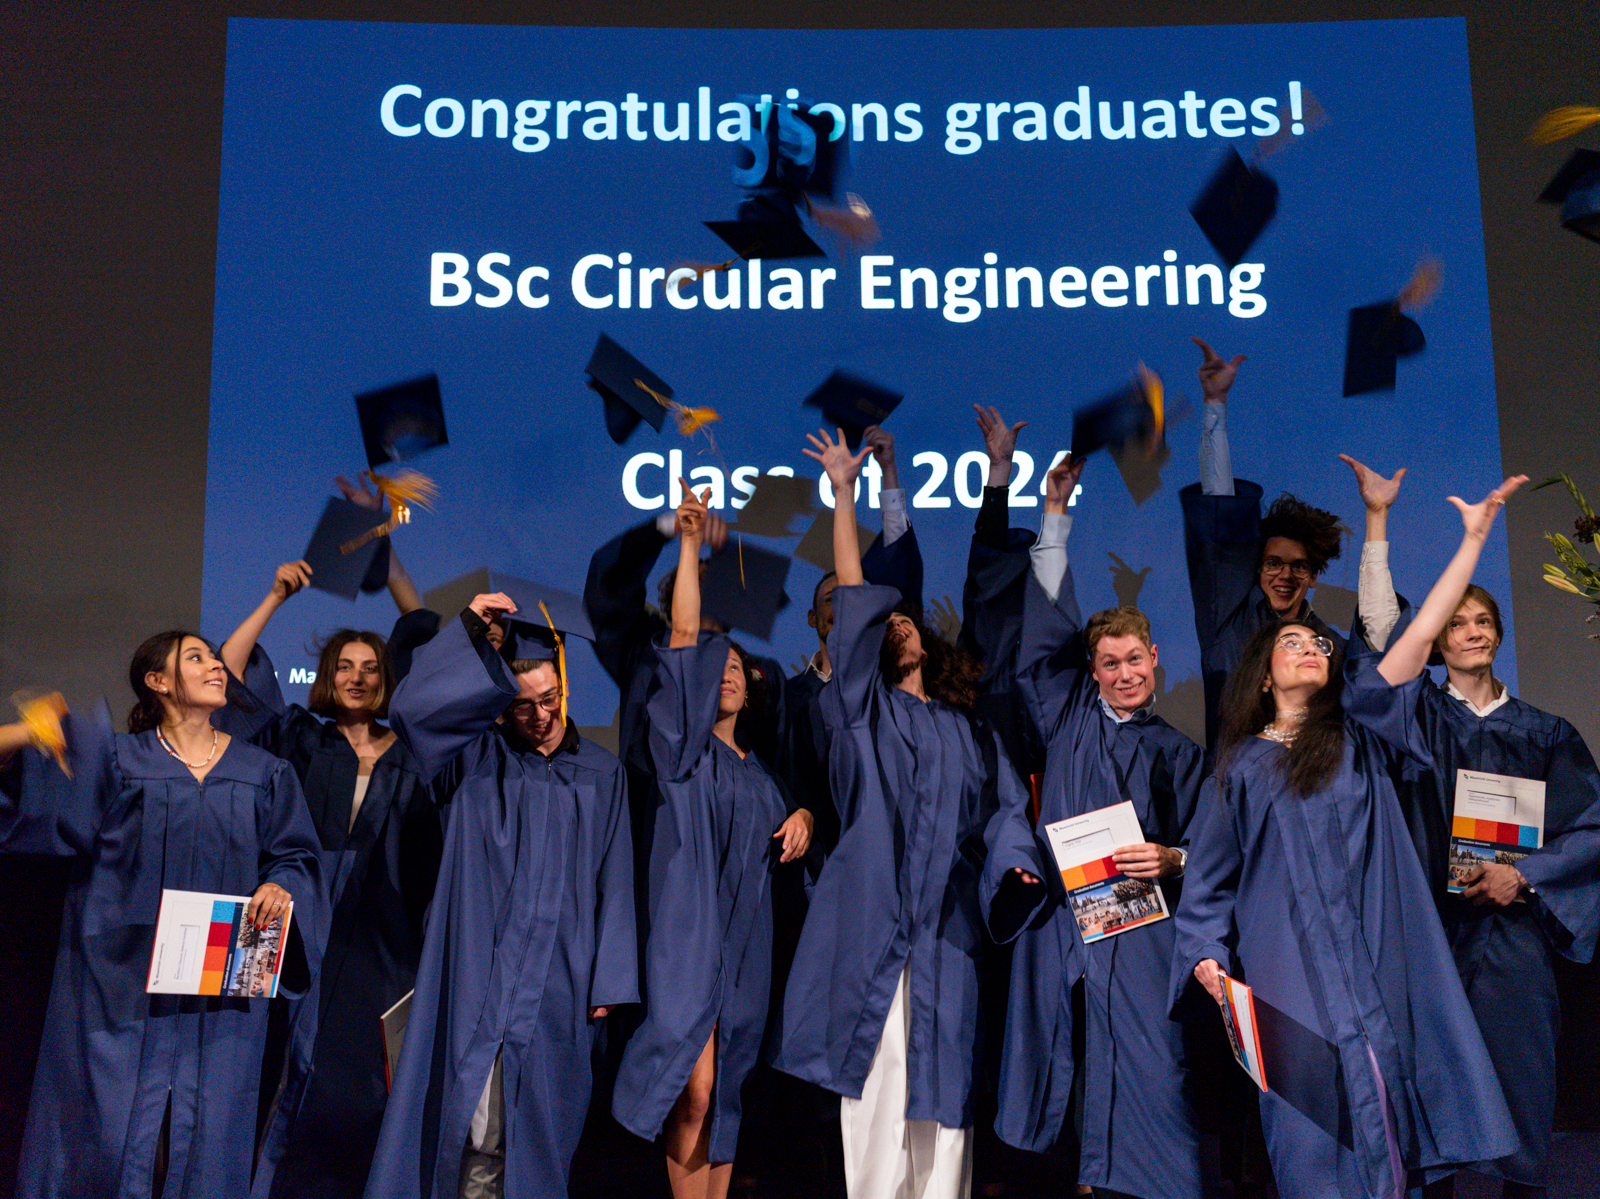 Students of Circular Engineering throwing their graduation caps